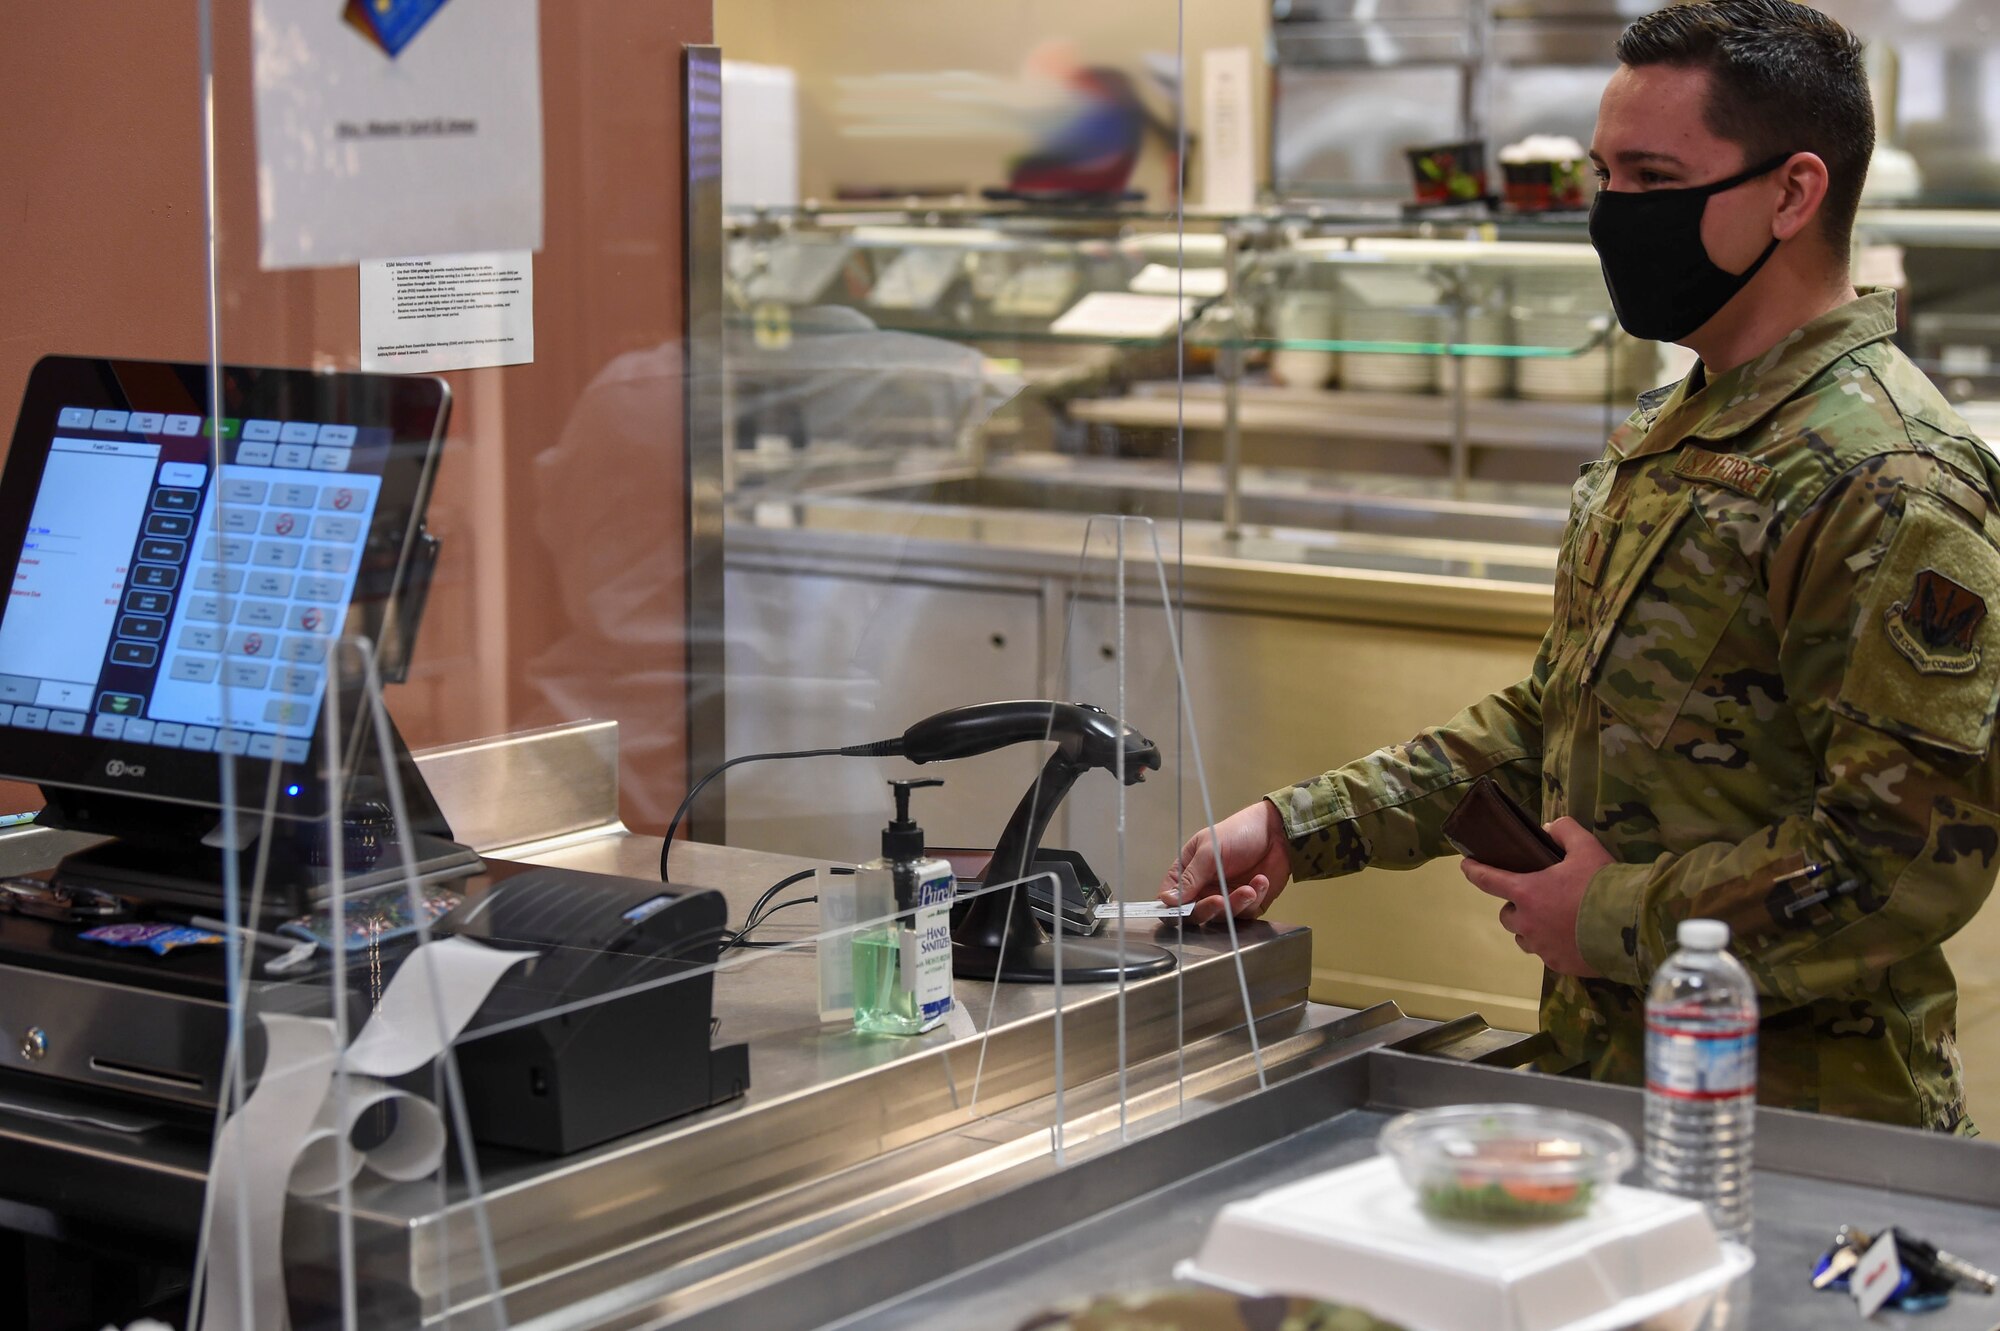 2nd Lt. Tyler, 432nd Operations Support Squadron pilot, uses his debit card in the Guardian Dining Facility at Creech Air Force Base.